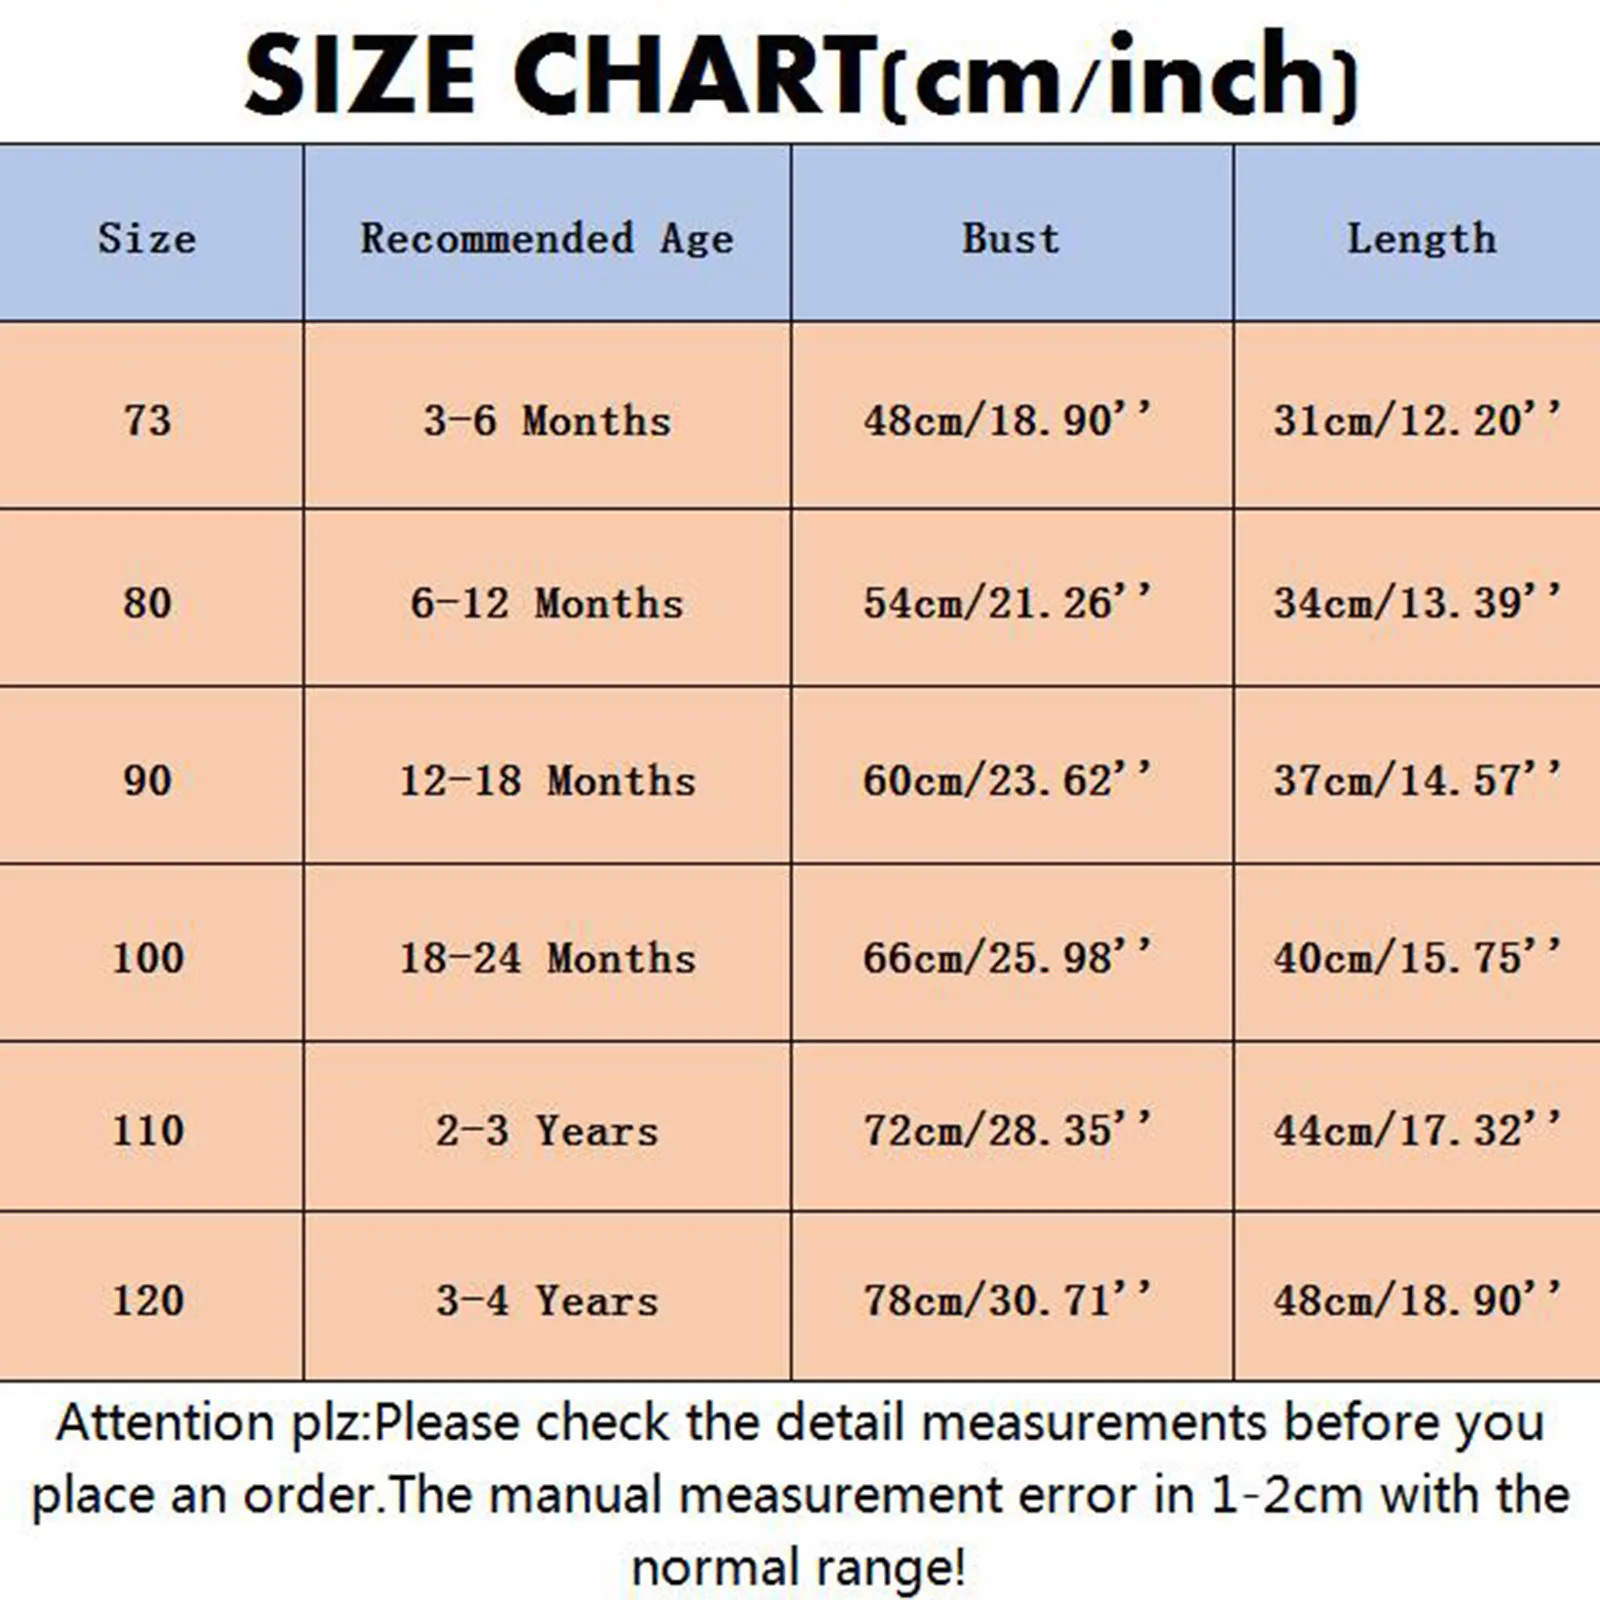 Baby Boys Girls Winter jacket Infant Warm Clothes Windproof Hooded Coat Toddler Flannel Outwear Children Clothing Baby Coats